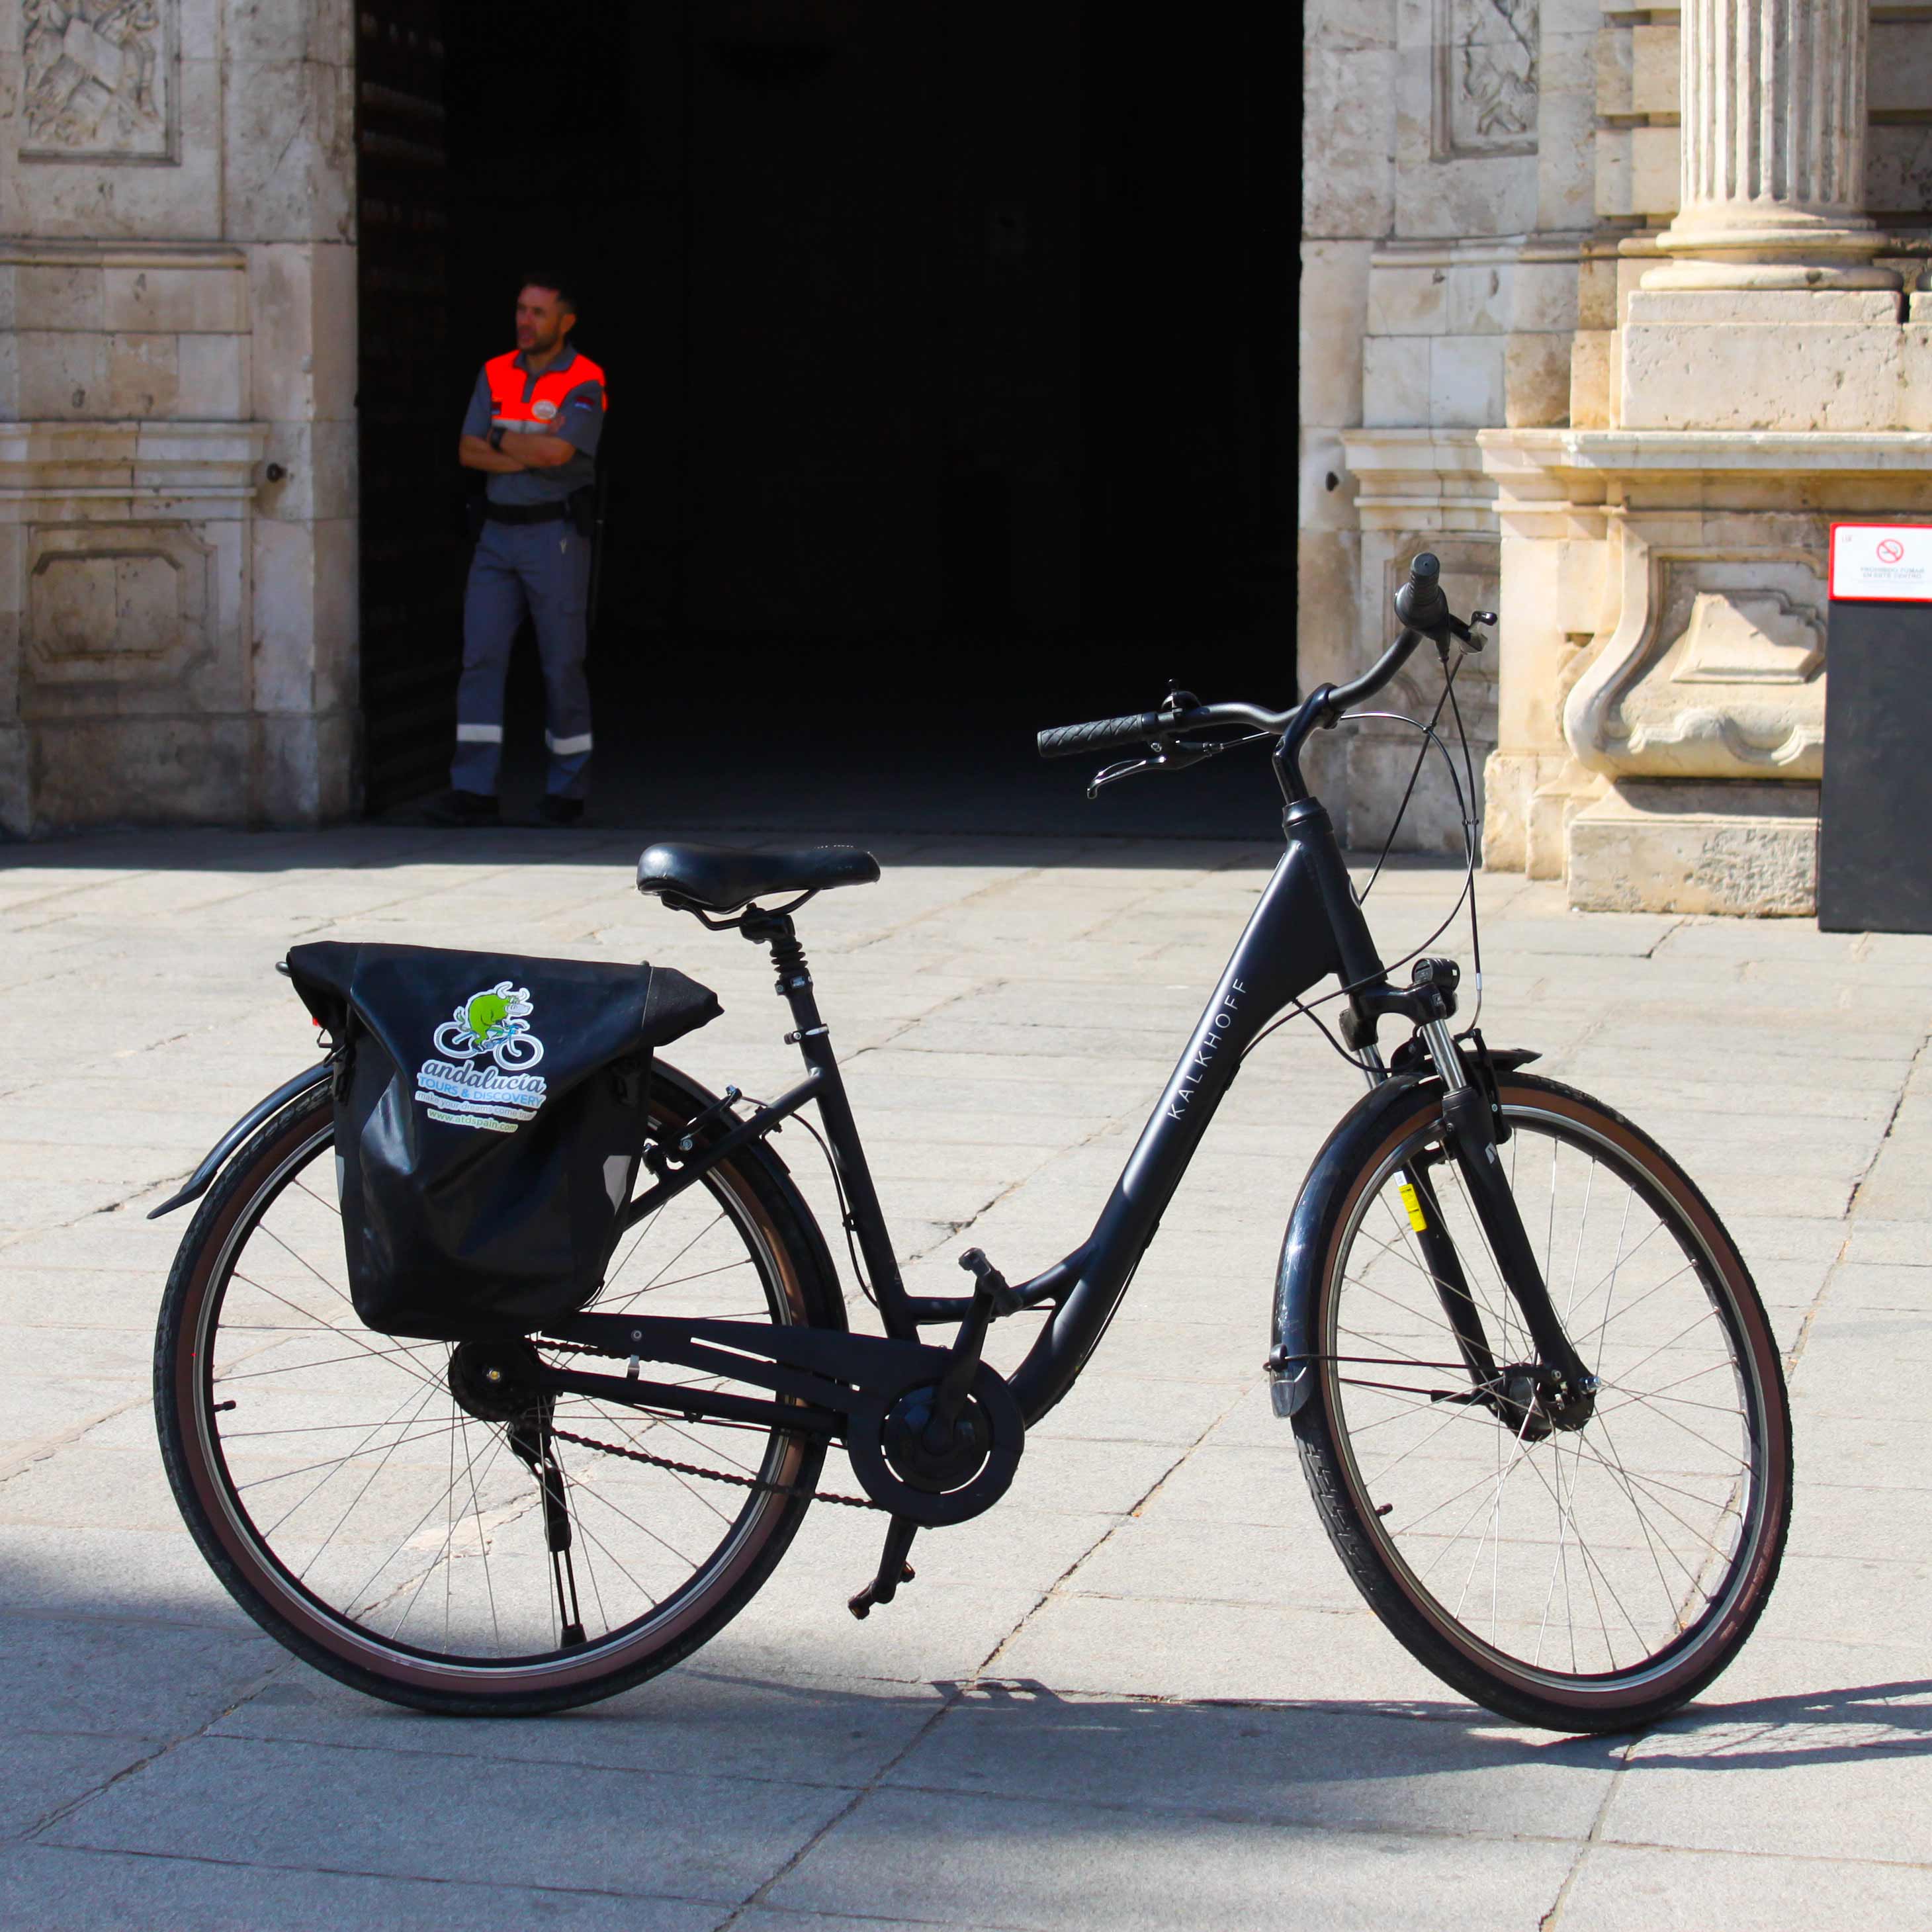 Picture of Kalkhoff bike in front of the University of Seville